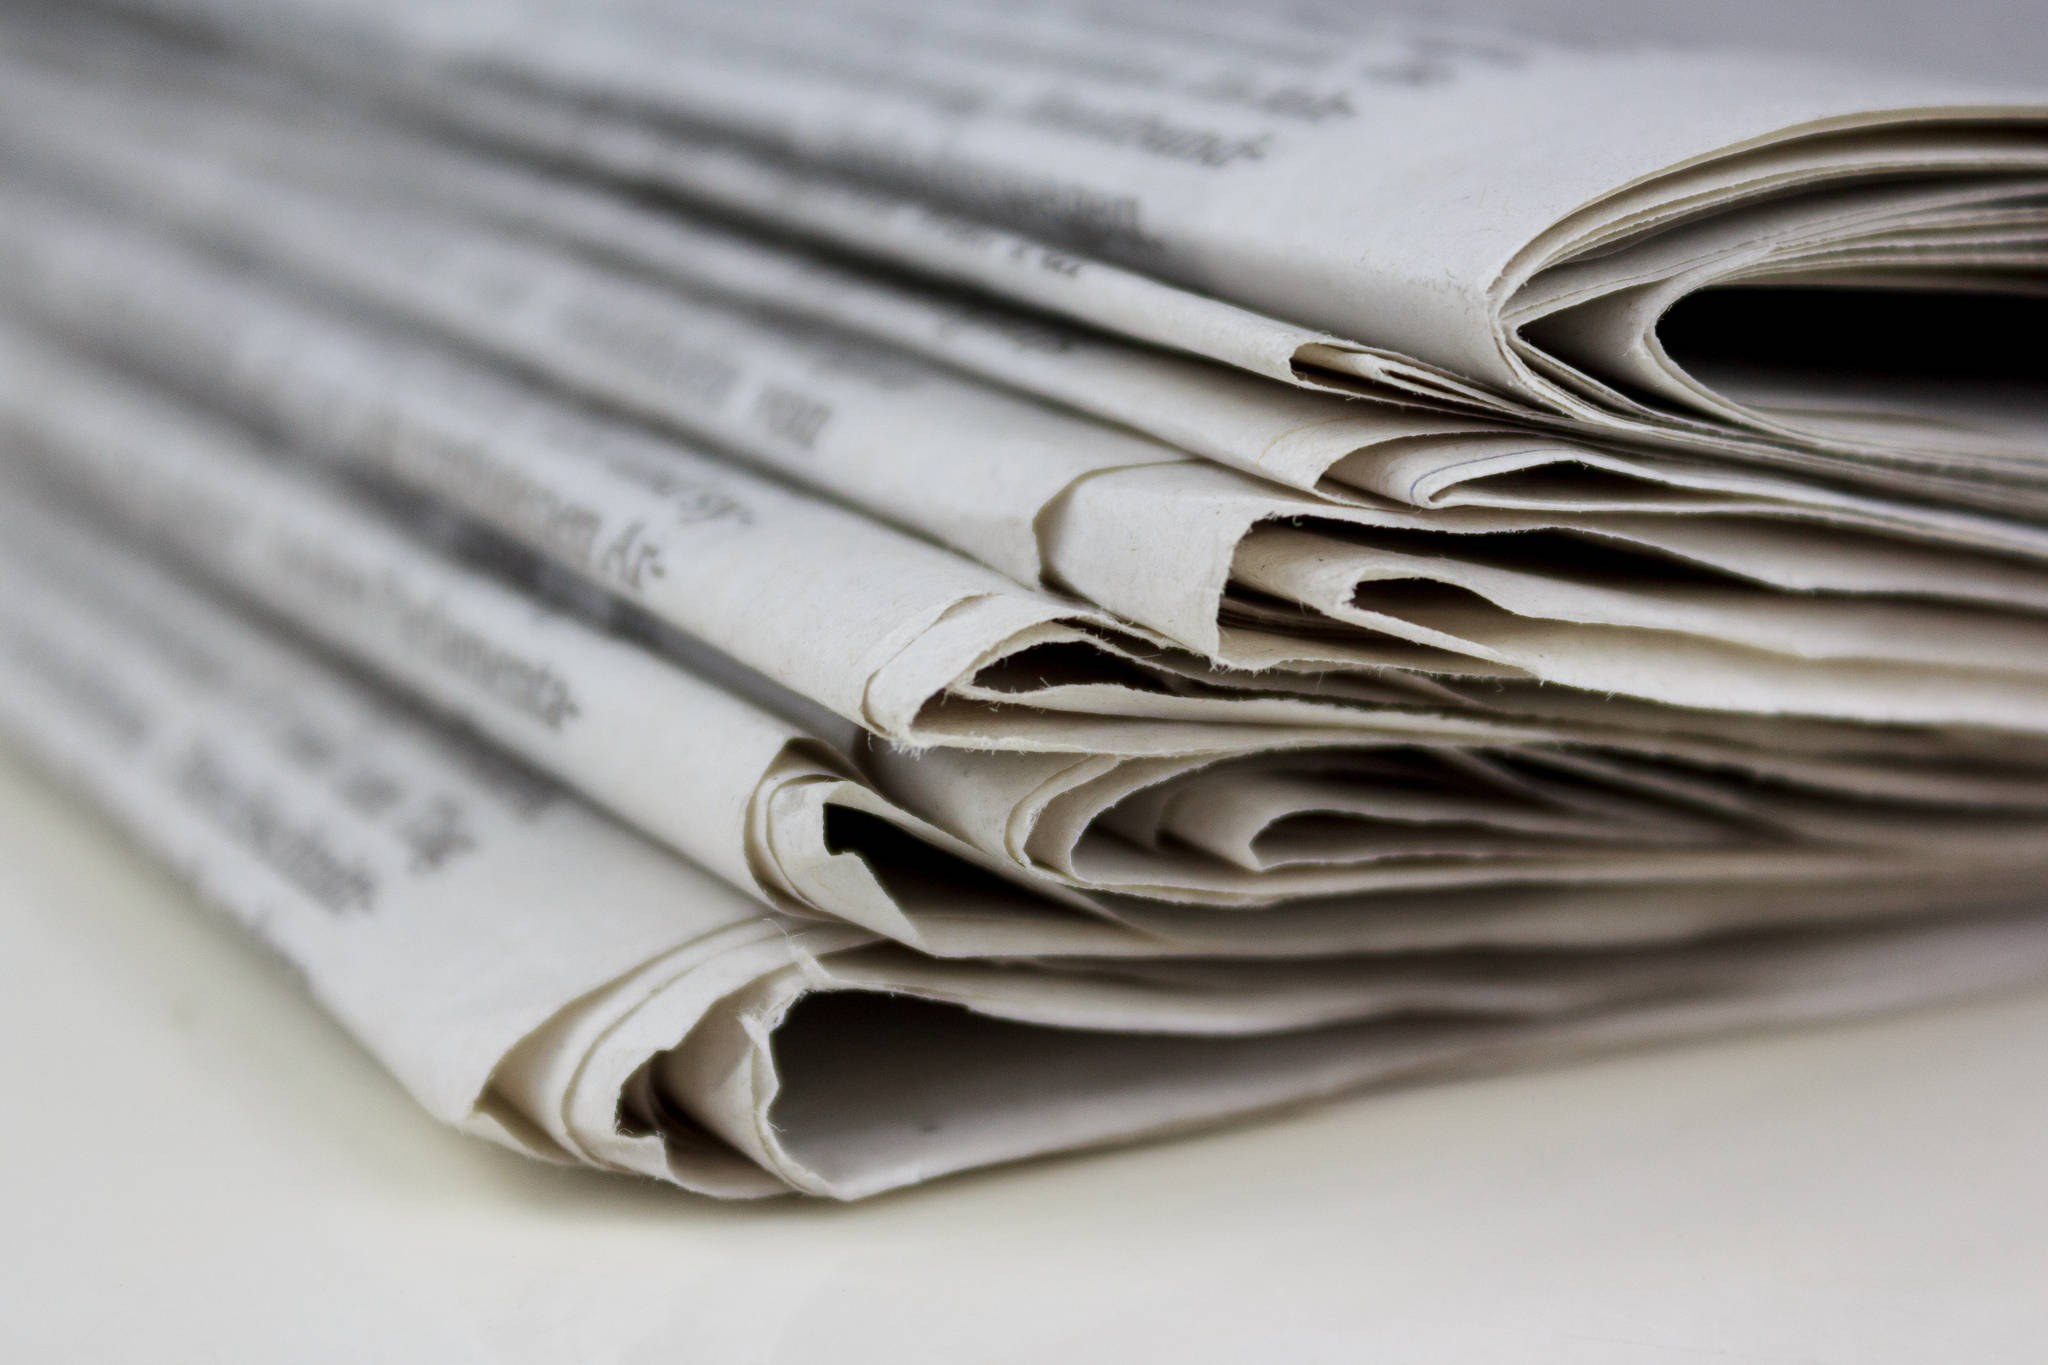 Legislature passes new protections for student newspapers